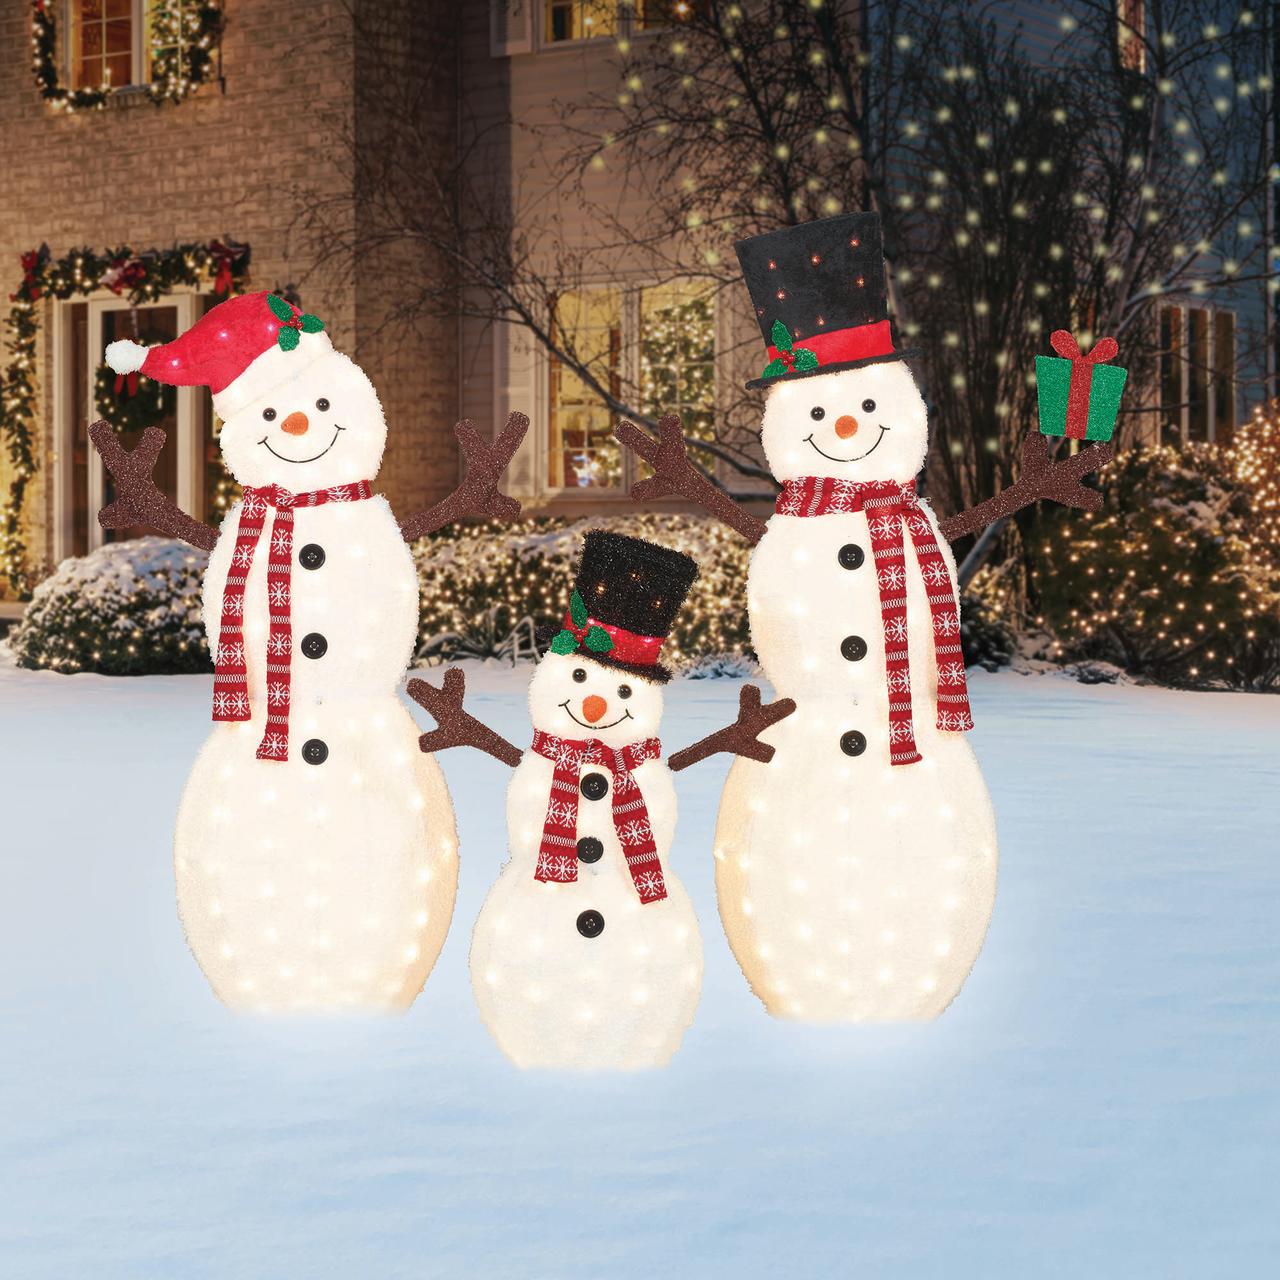 Holiday Time Set Of 3 Fluffy Snowman Family - image 3 of 5